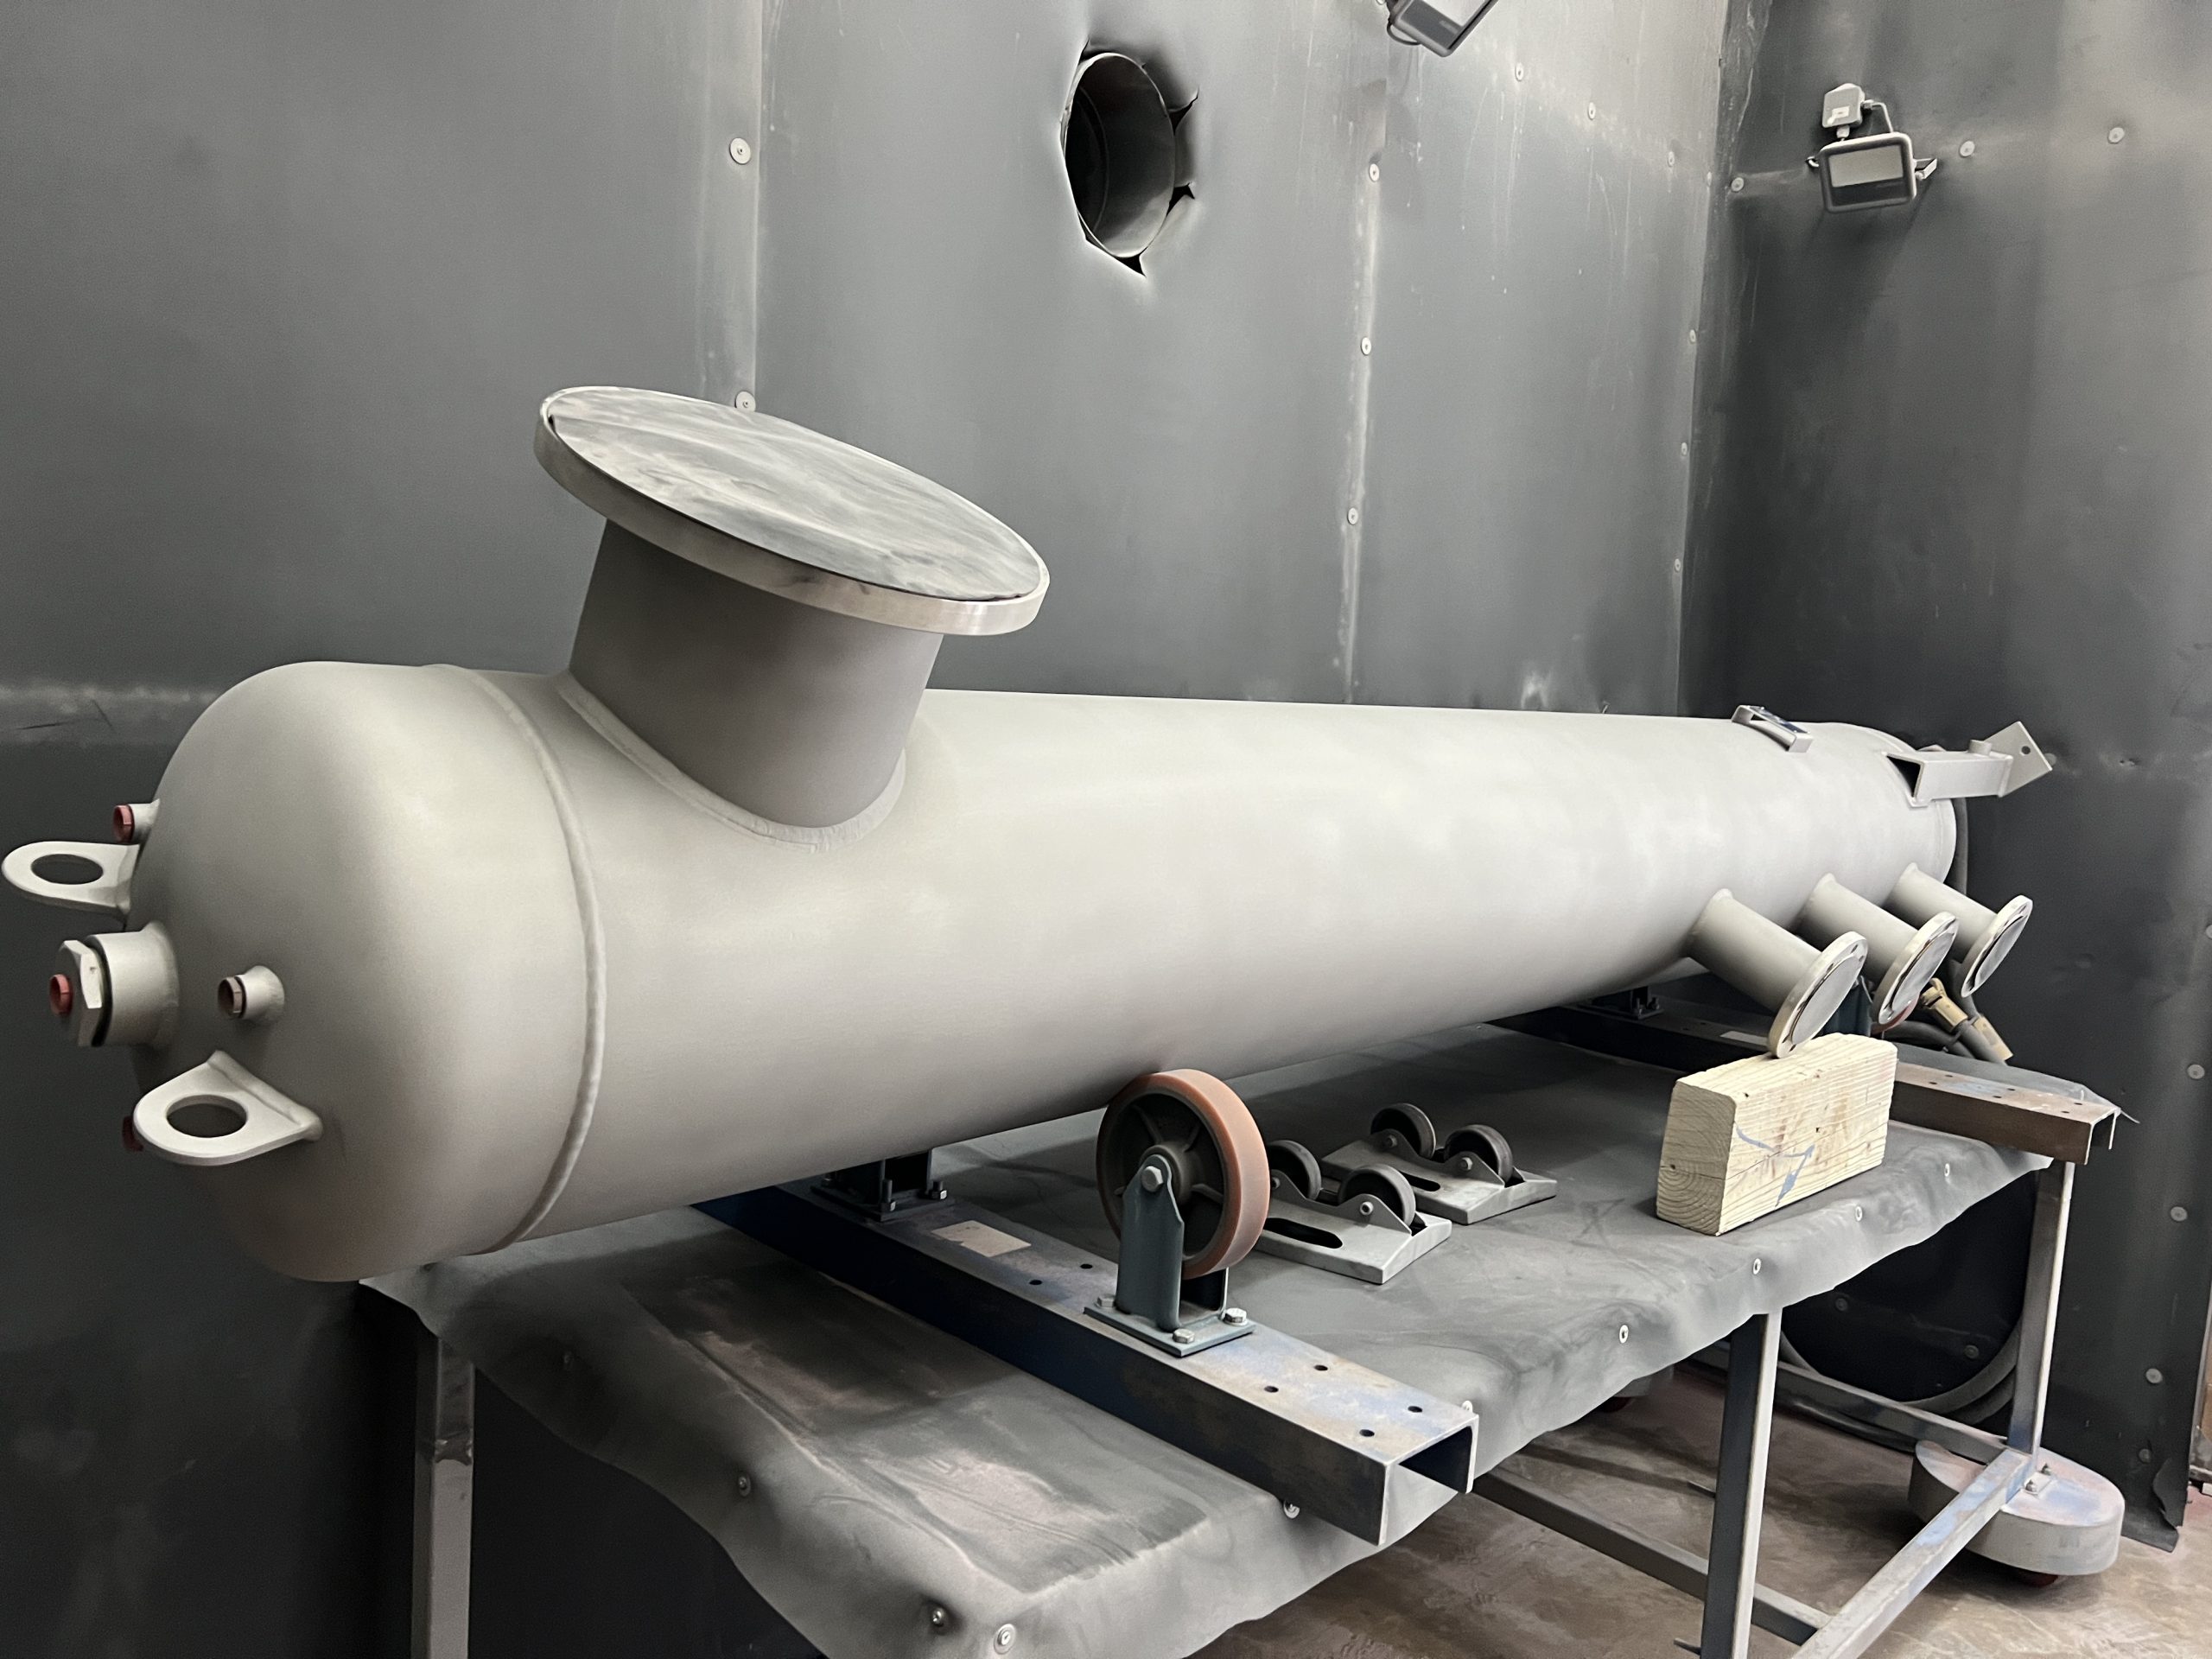 530°C Exhaust Plenum Vessel made from stainless steel 316/L